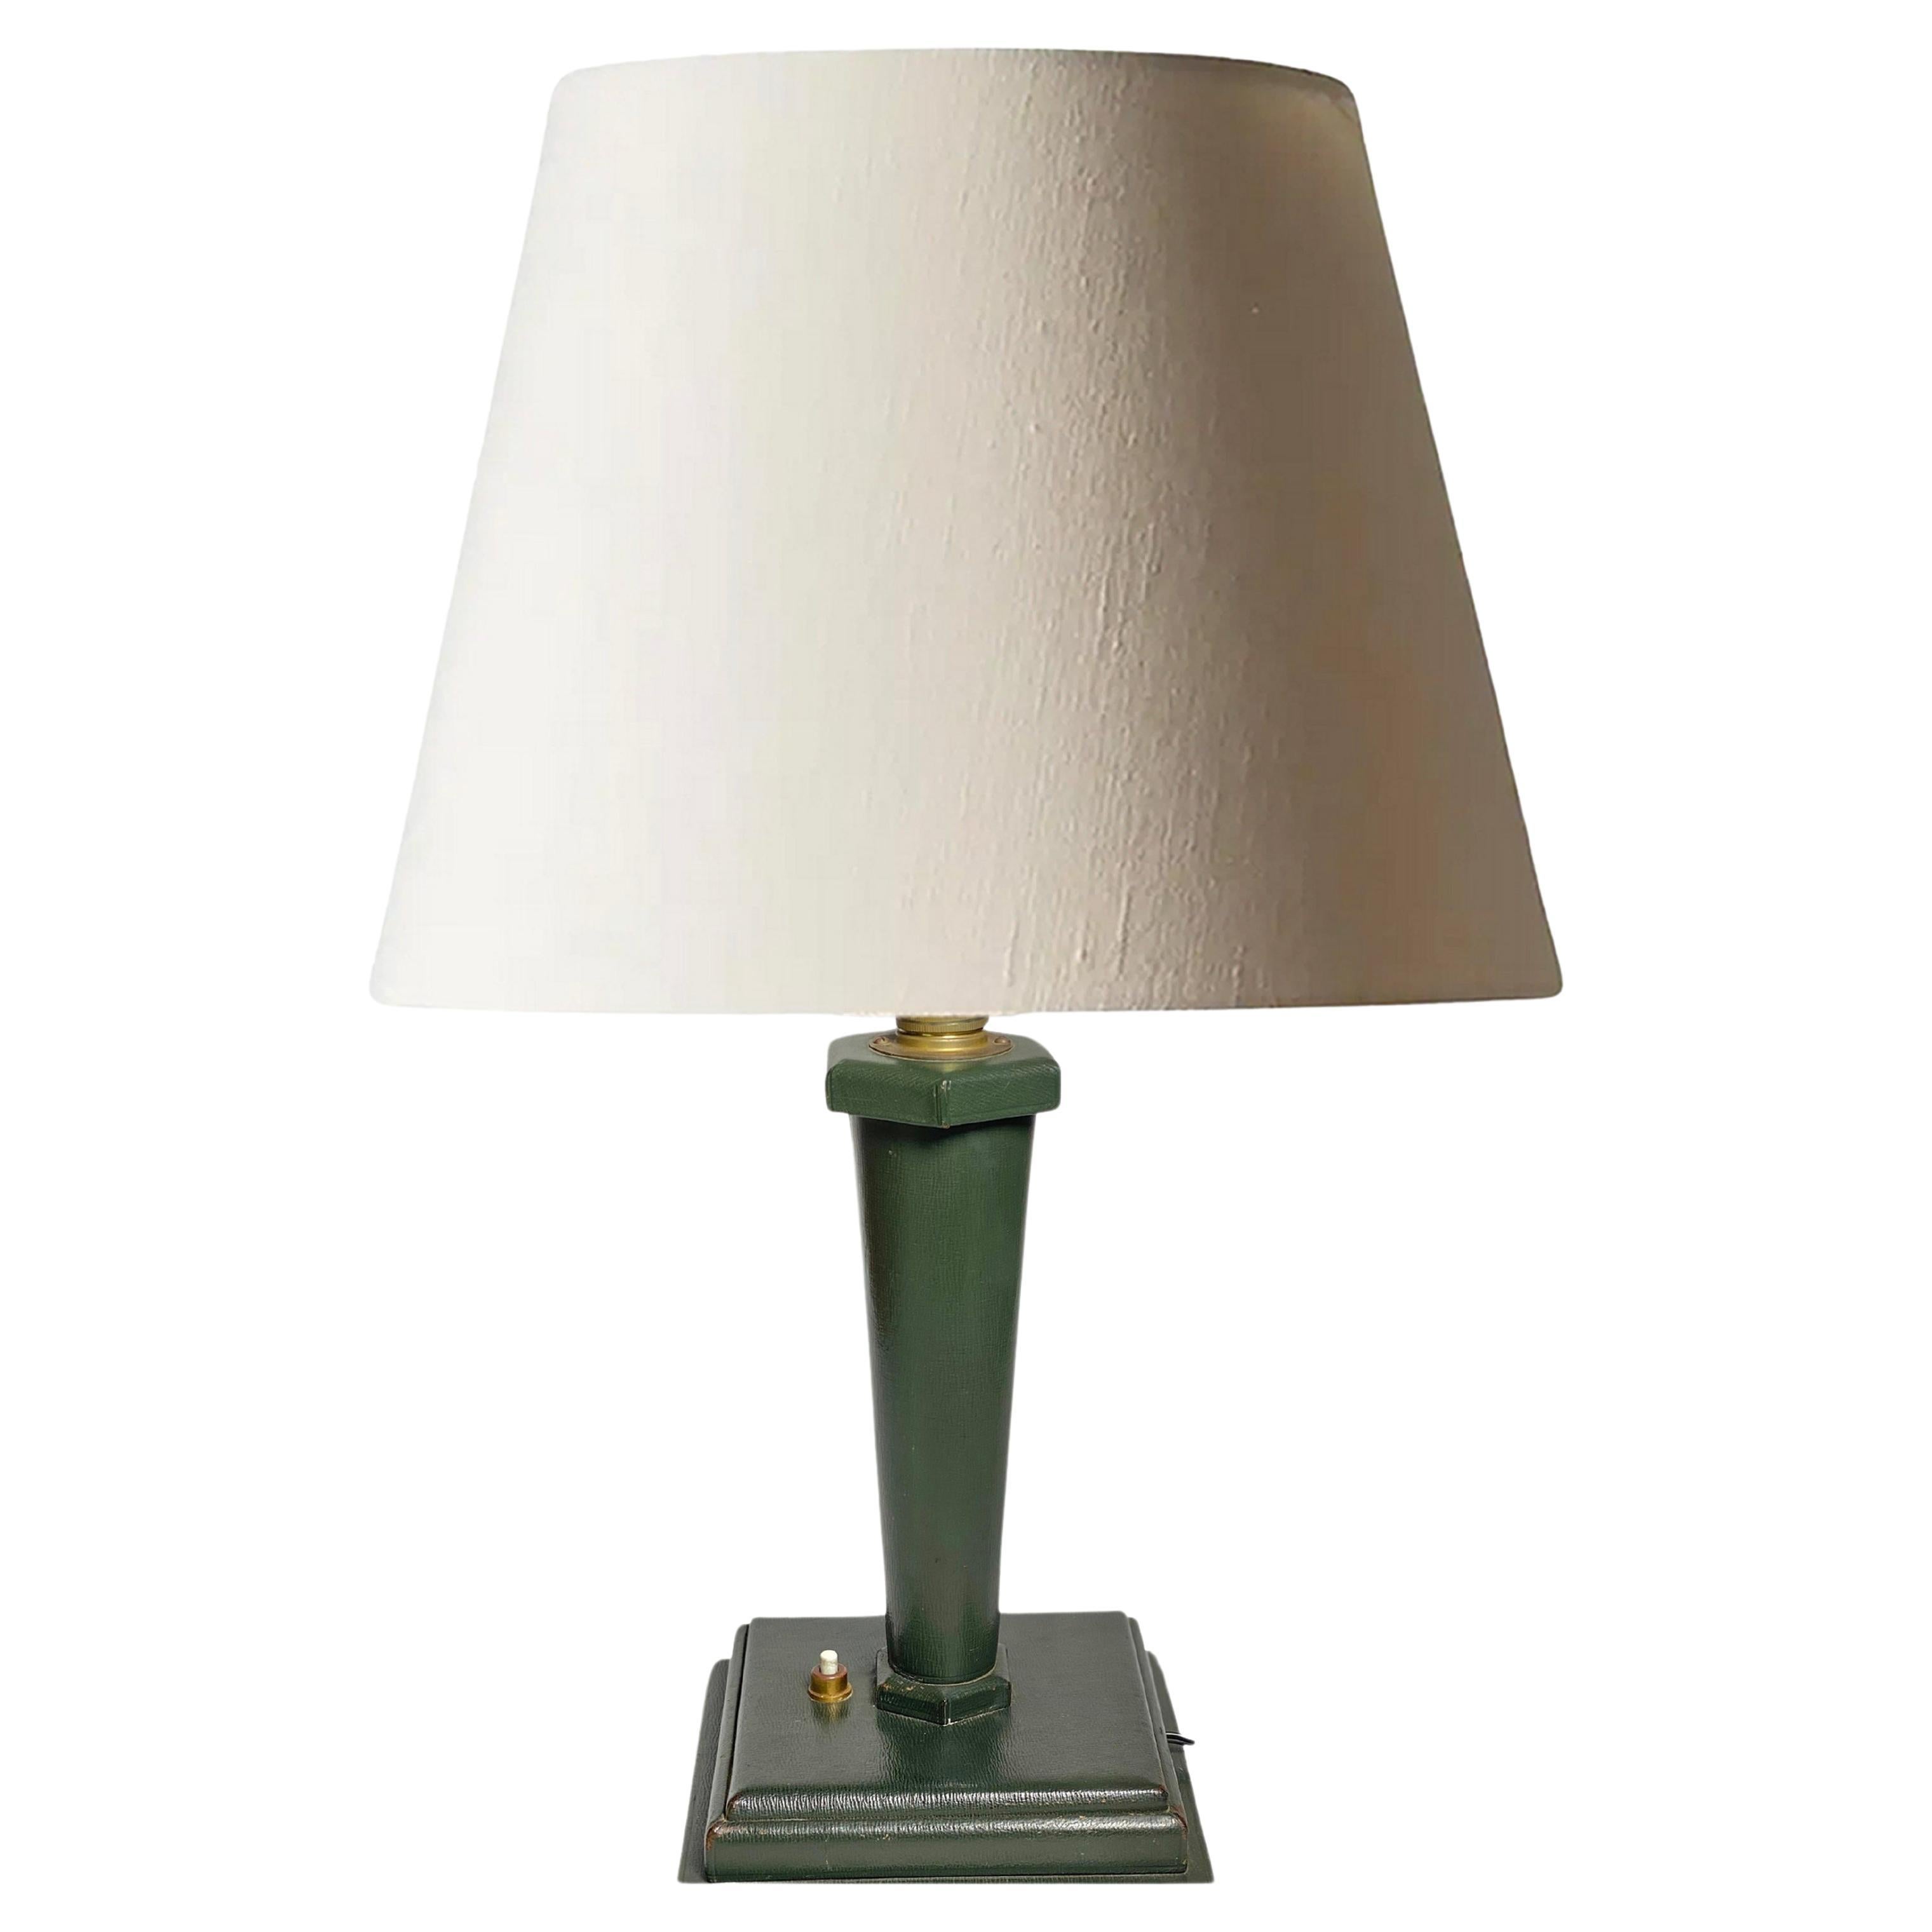 Jacques Adnet Style Table Lamp, Green Leather, France, circa 1940 For Sale